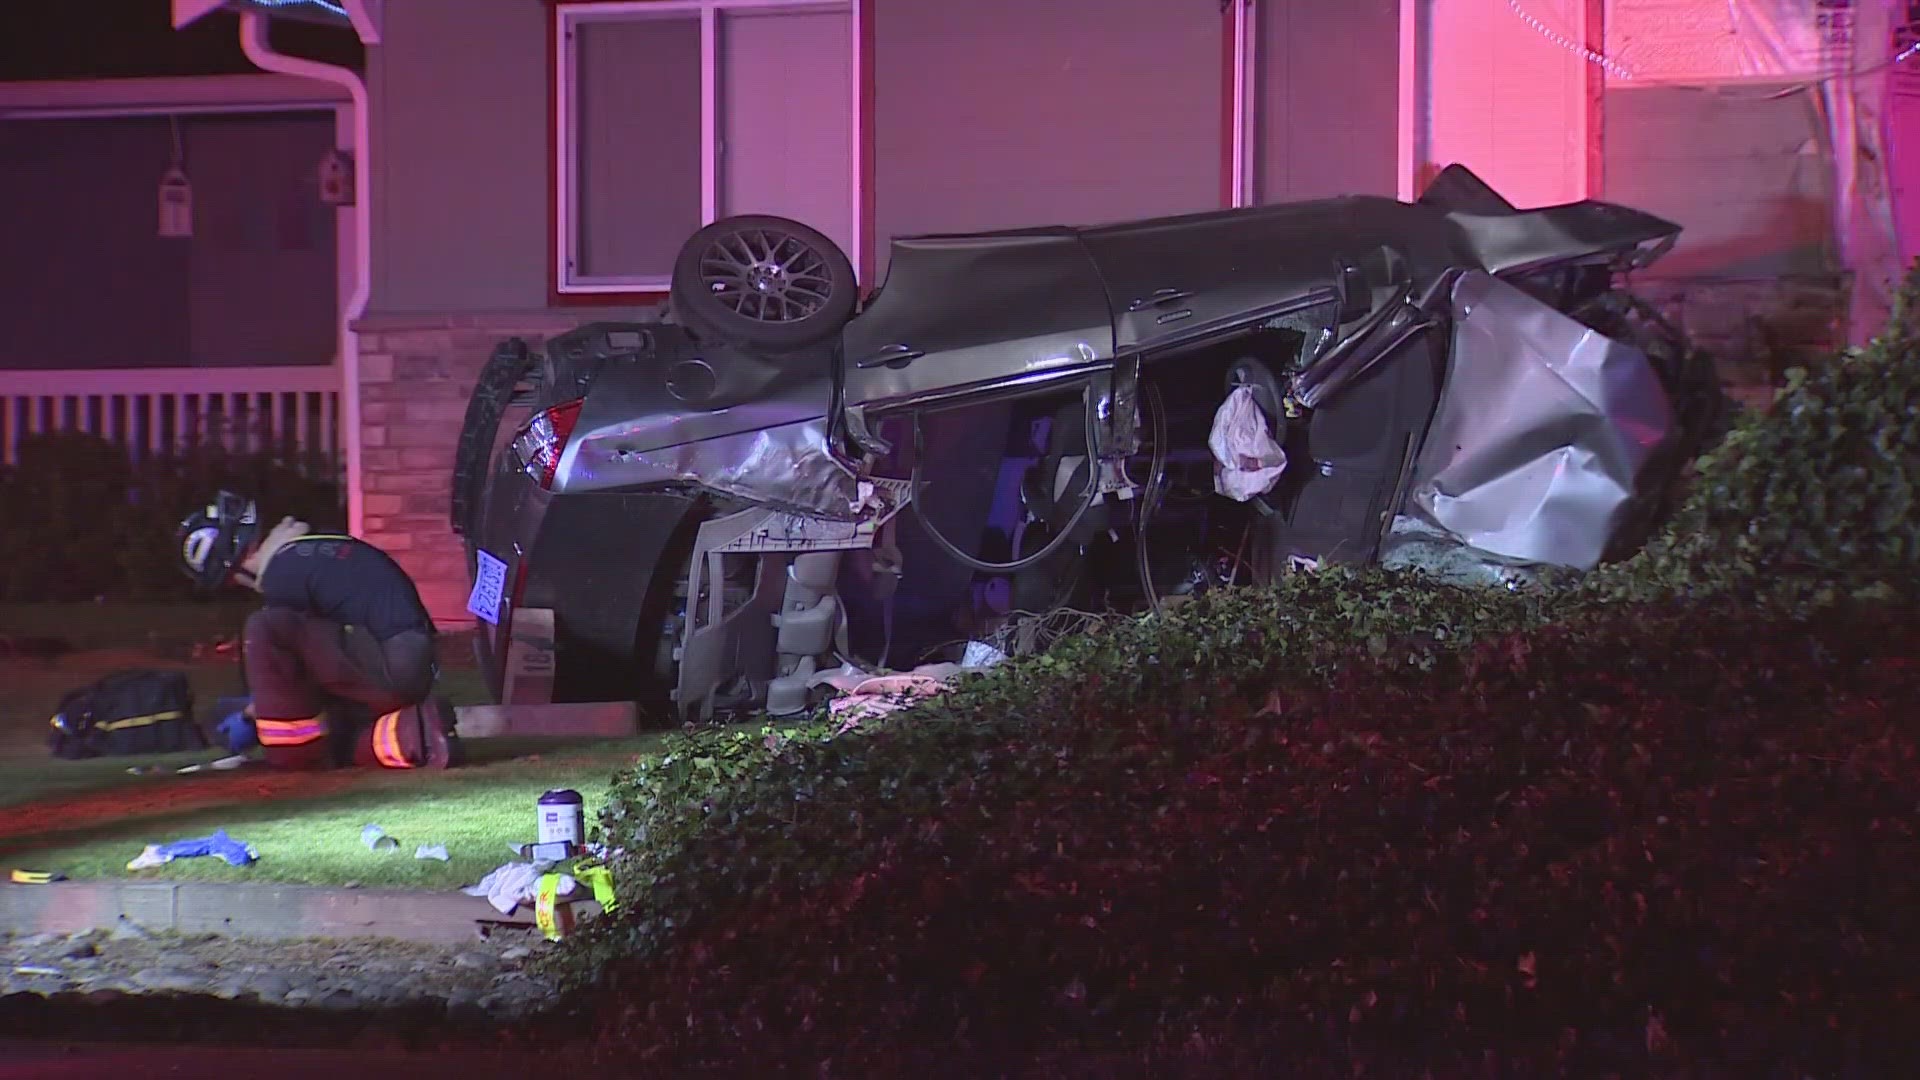 A woman has died and a man is in critical condition after a car ran into a house in Spanaway